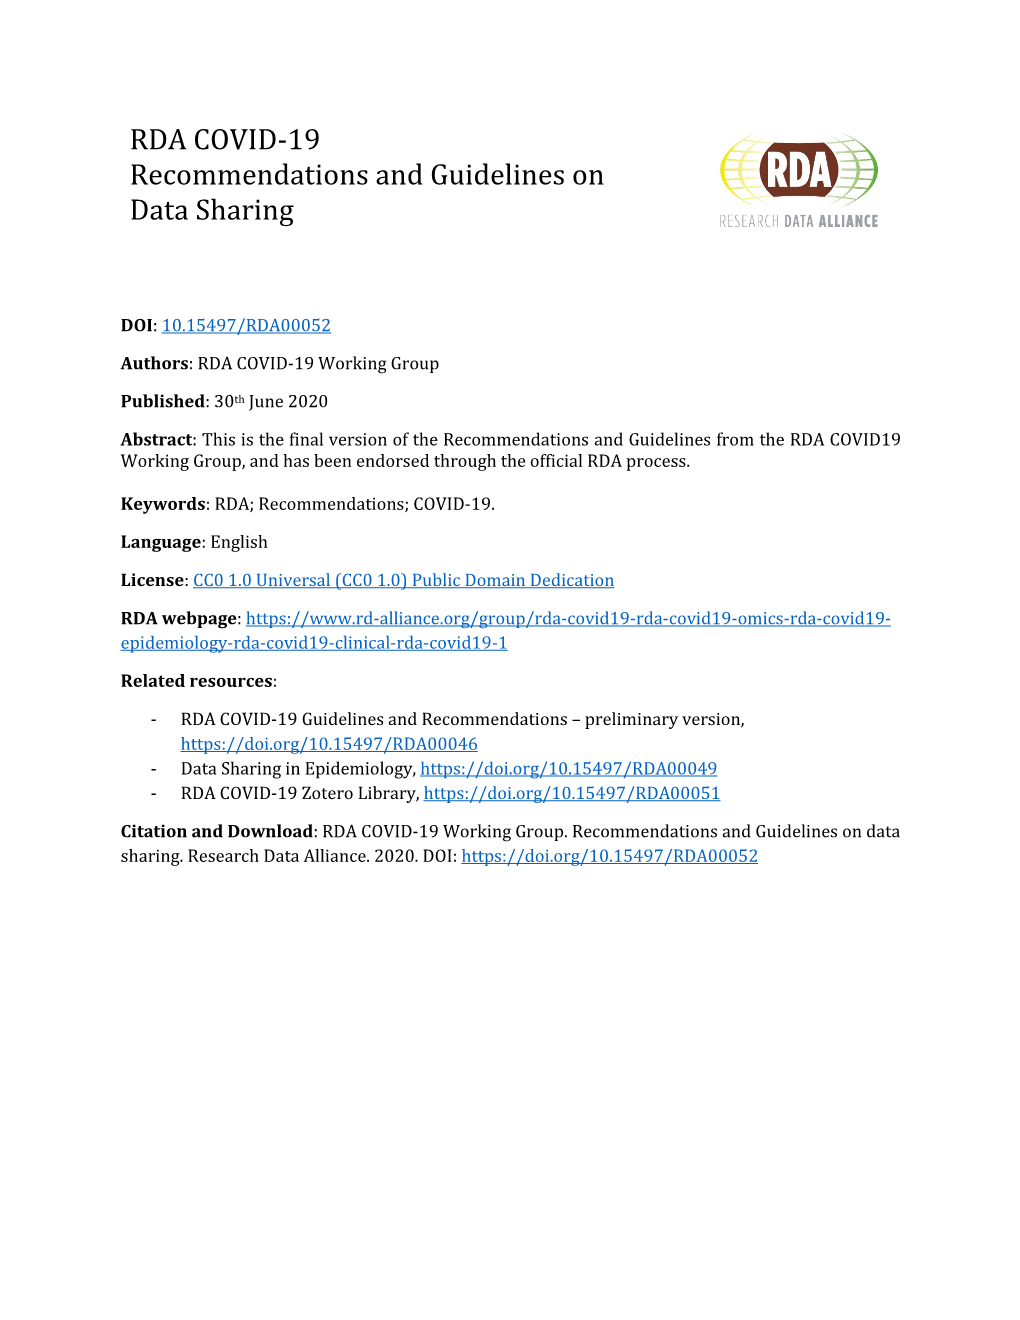 RDA COVID-19 Recommendations and Guidelines on Data Sharing